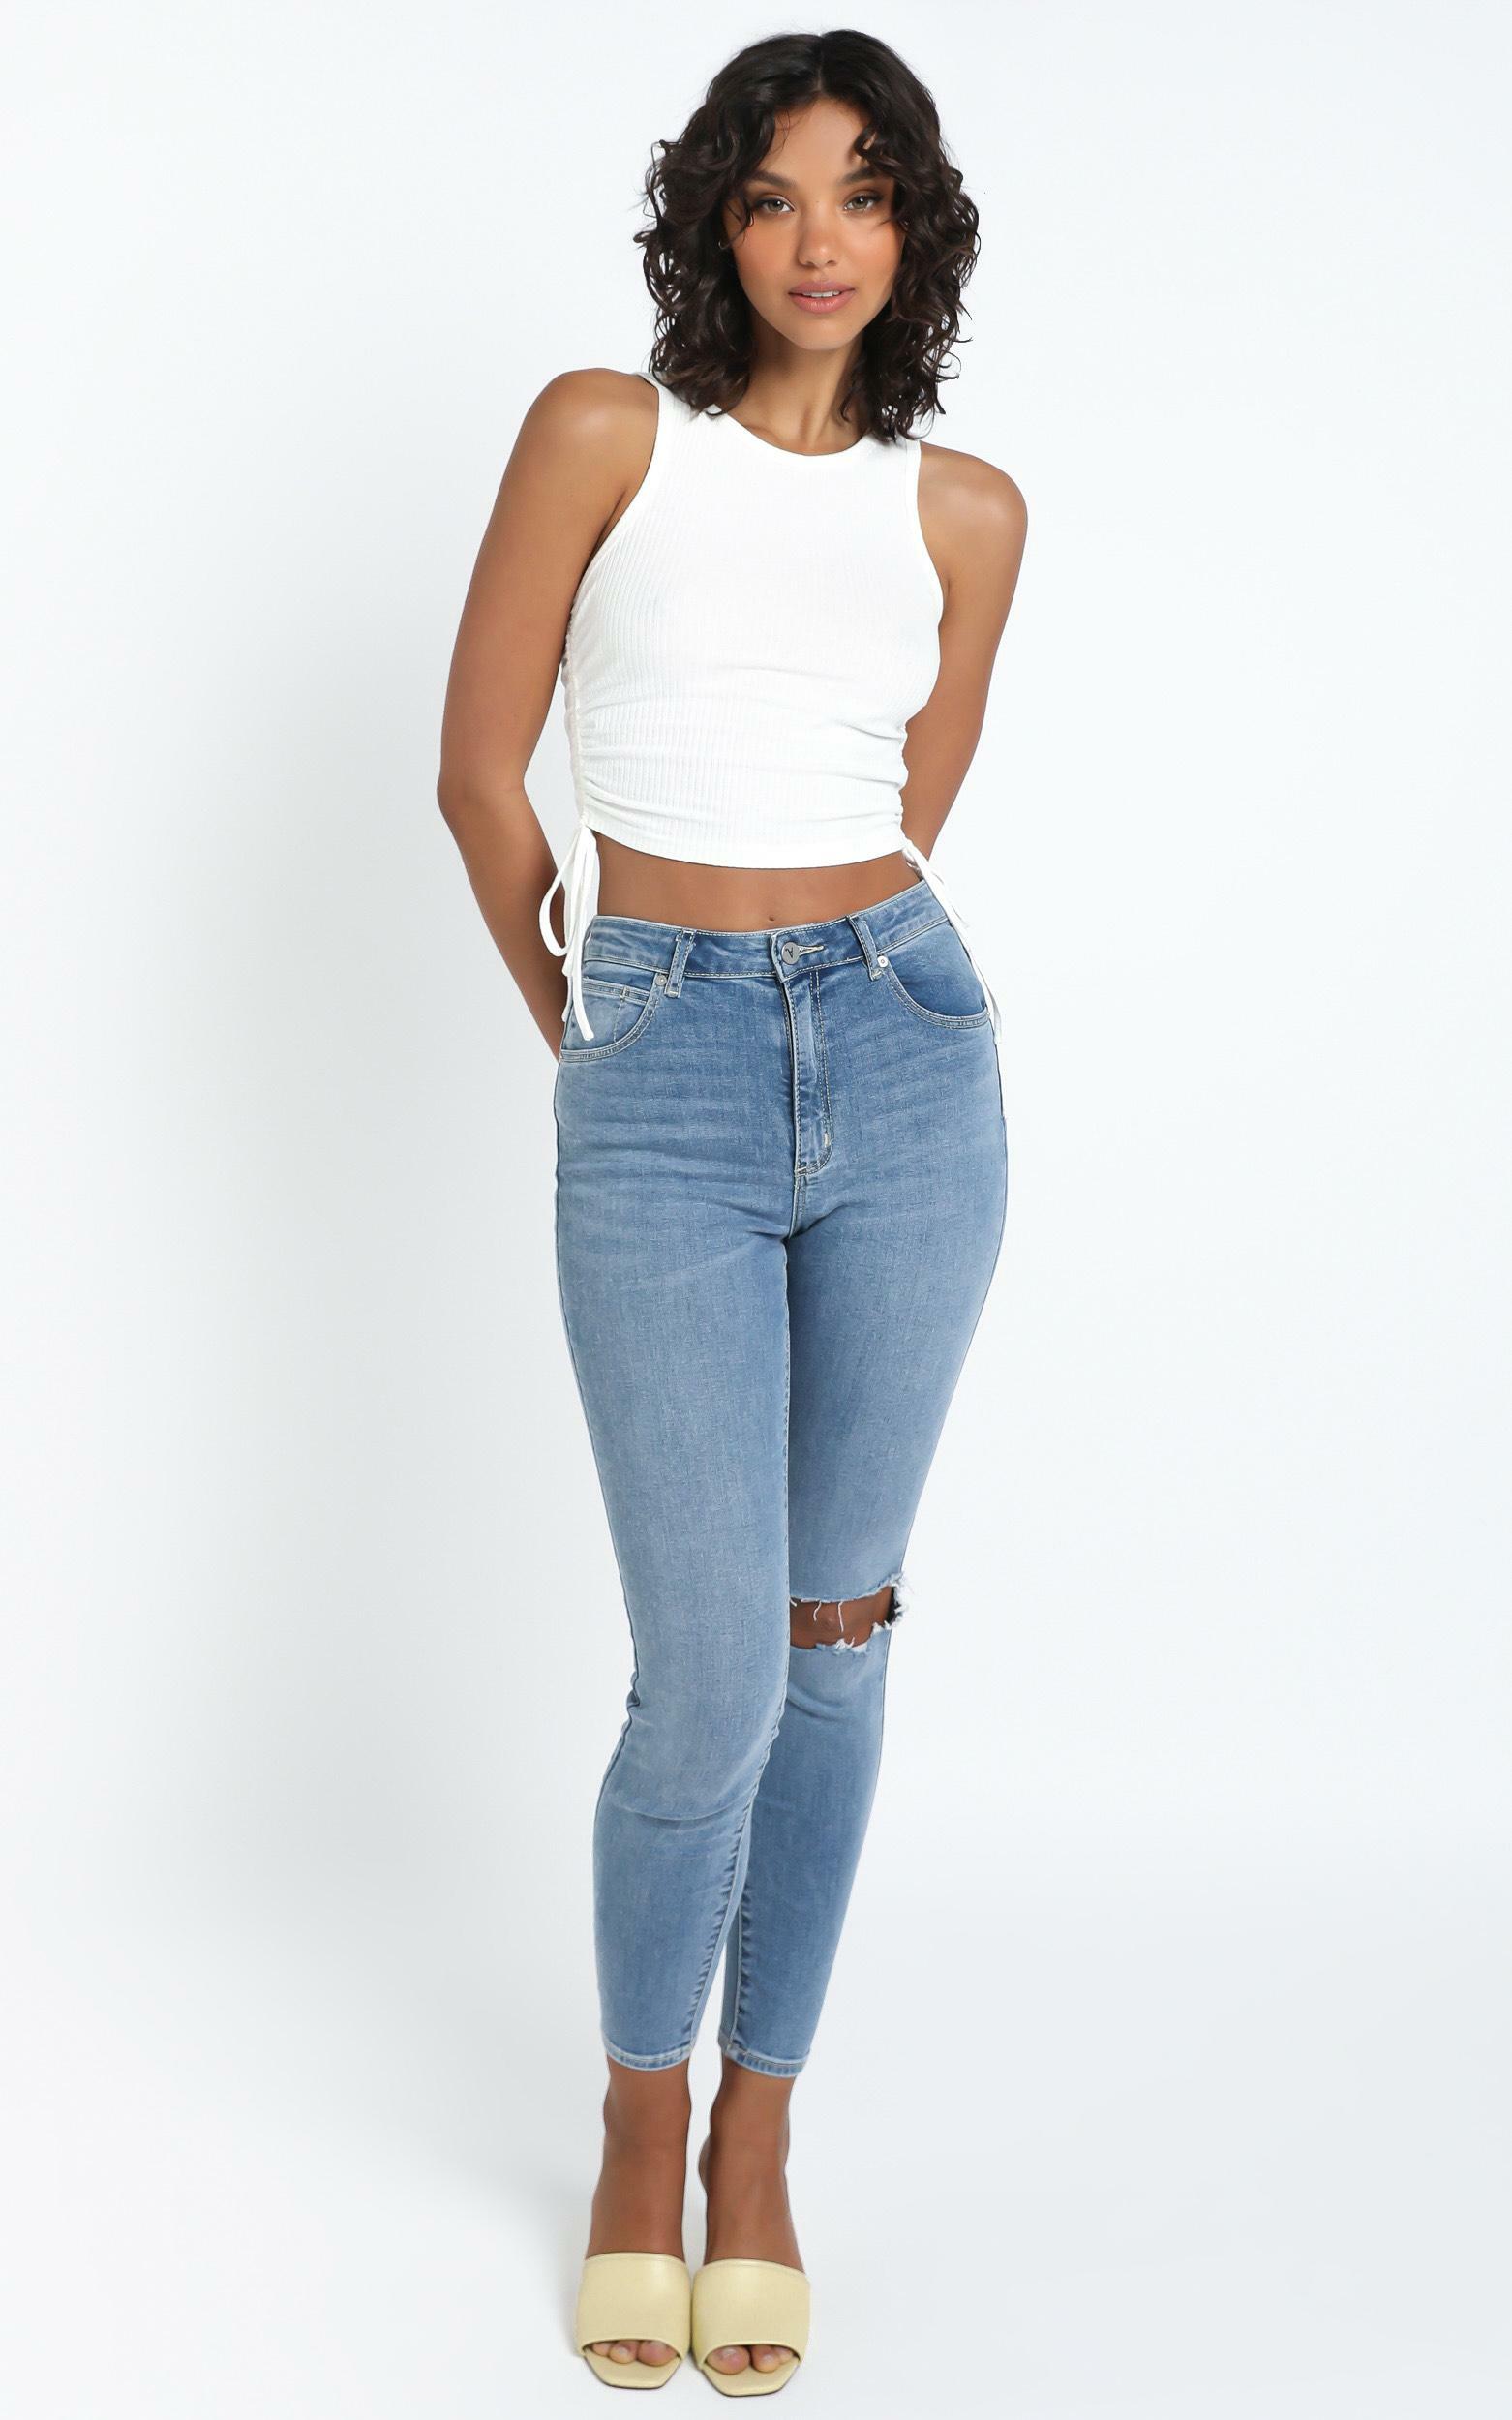 a high skinny ankle basher jeans